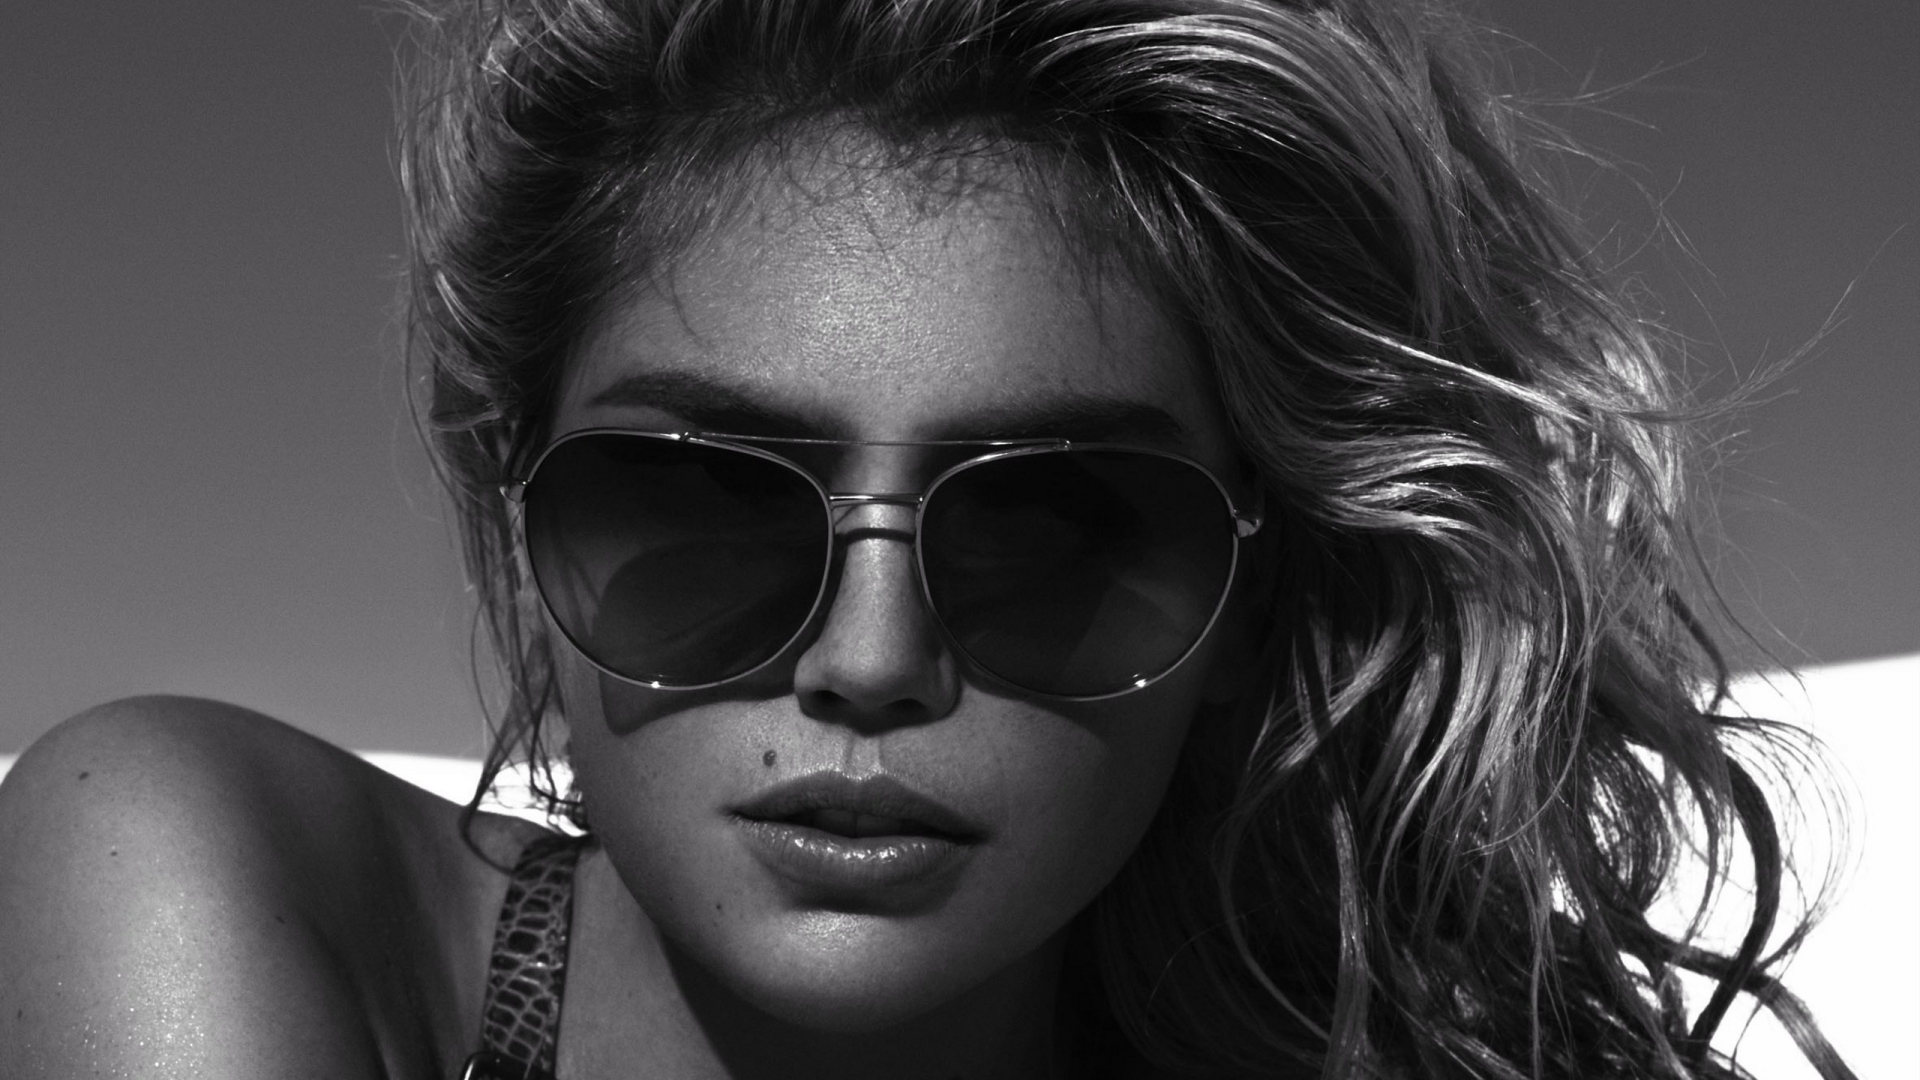 Kate Upton Black and White for 1920 x 1080 HDTV 1080p resolution